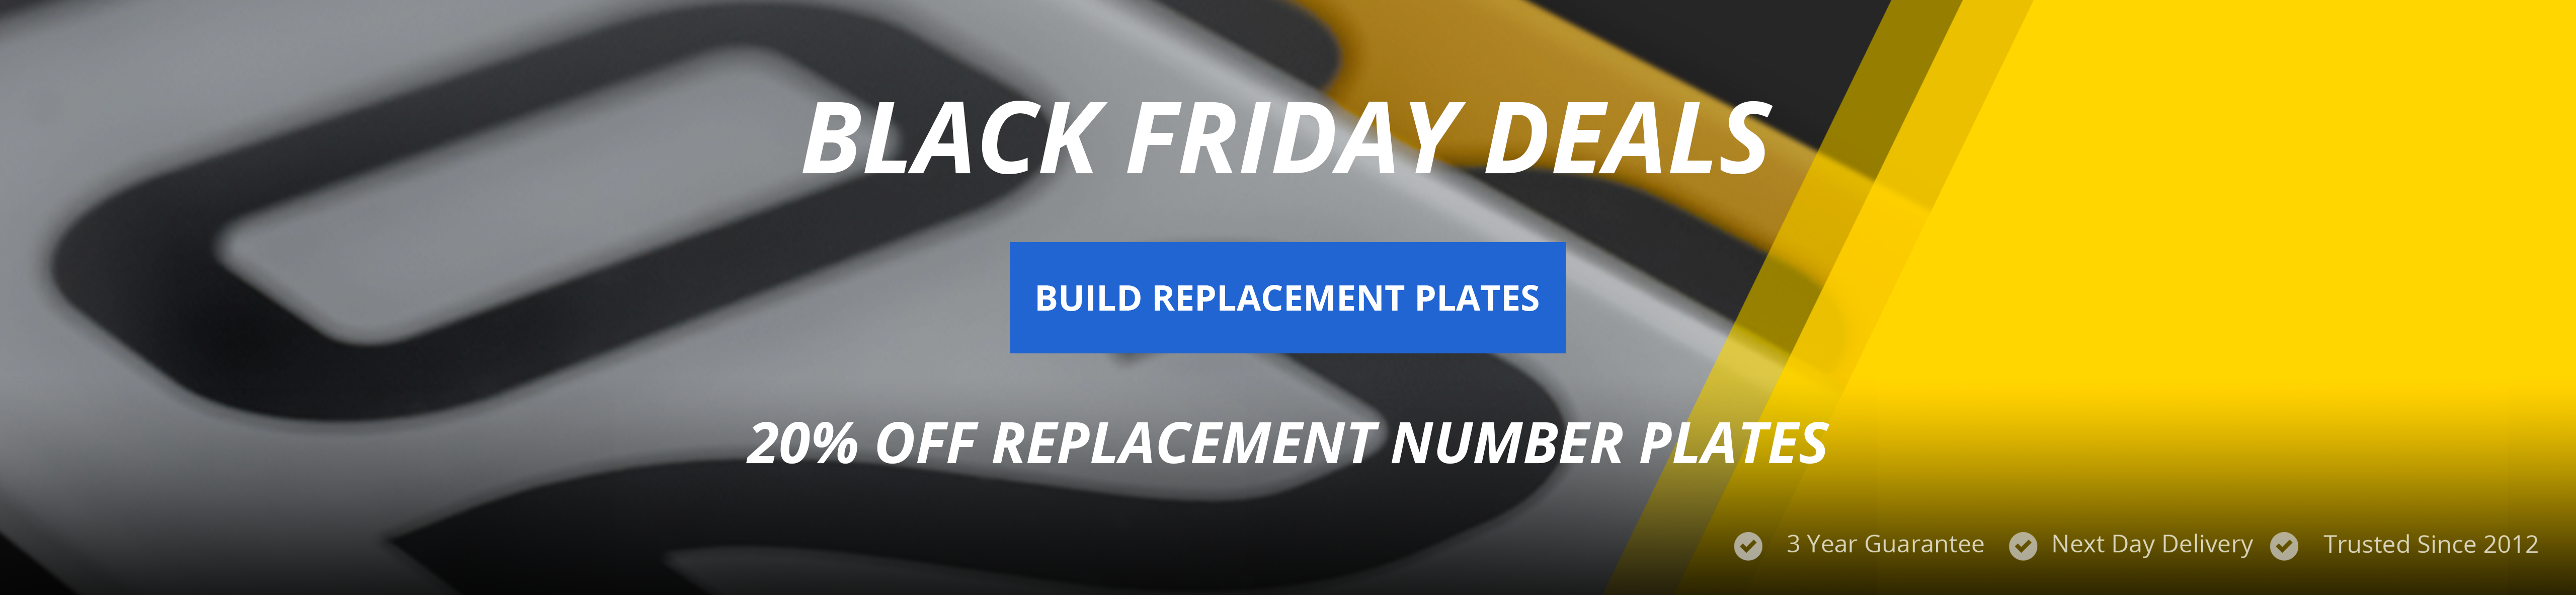 Black Friday Deals: 20% OFF Replacement Number Plates